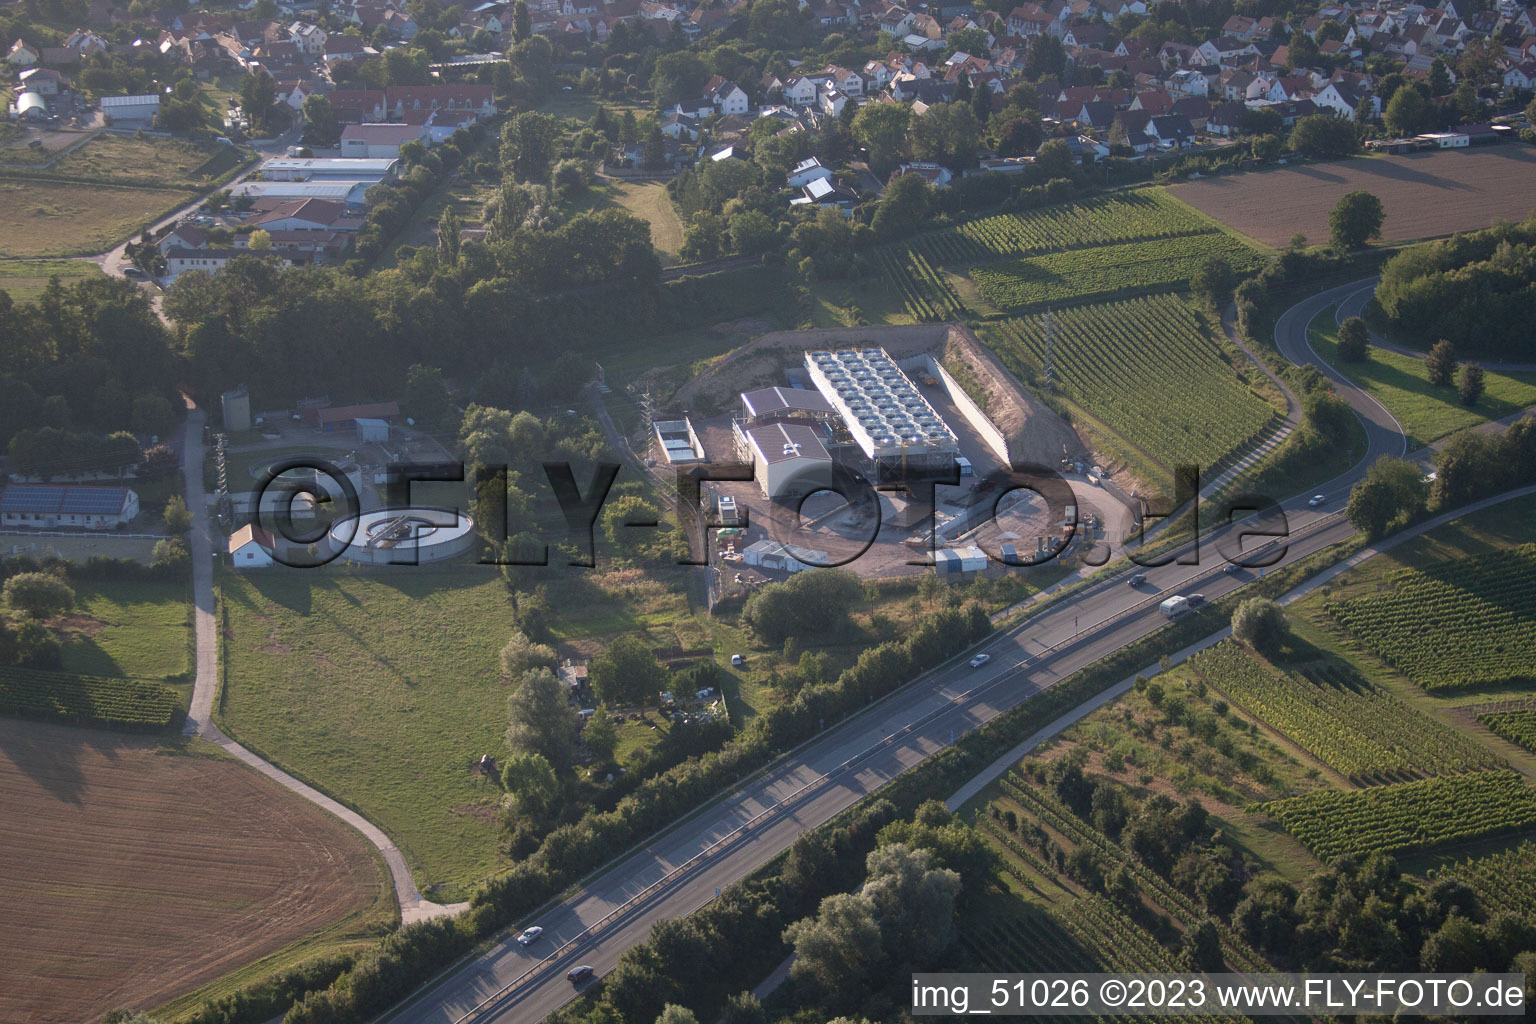 Geothermal energy plant from Pfalzwerke geofuture GmbH at Insheim on the A65 in Insheim in the state Rhineland-Palatinate, Germany seen from above